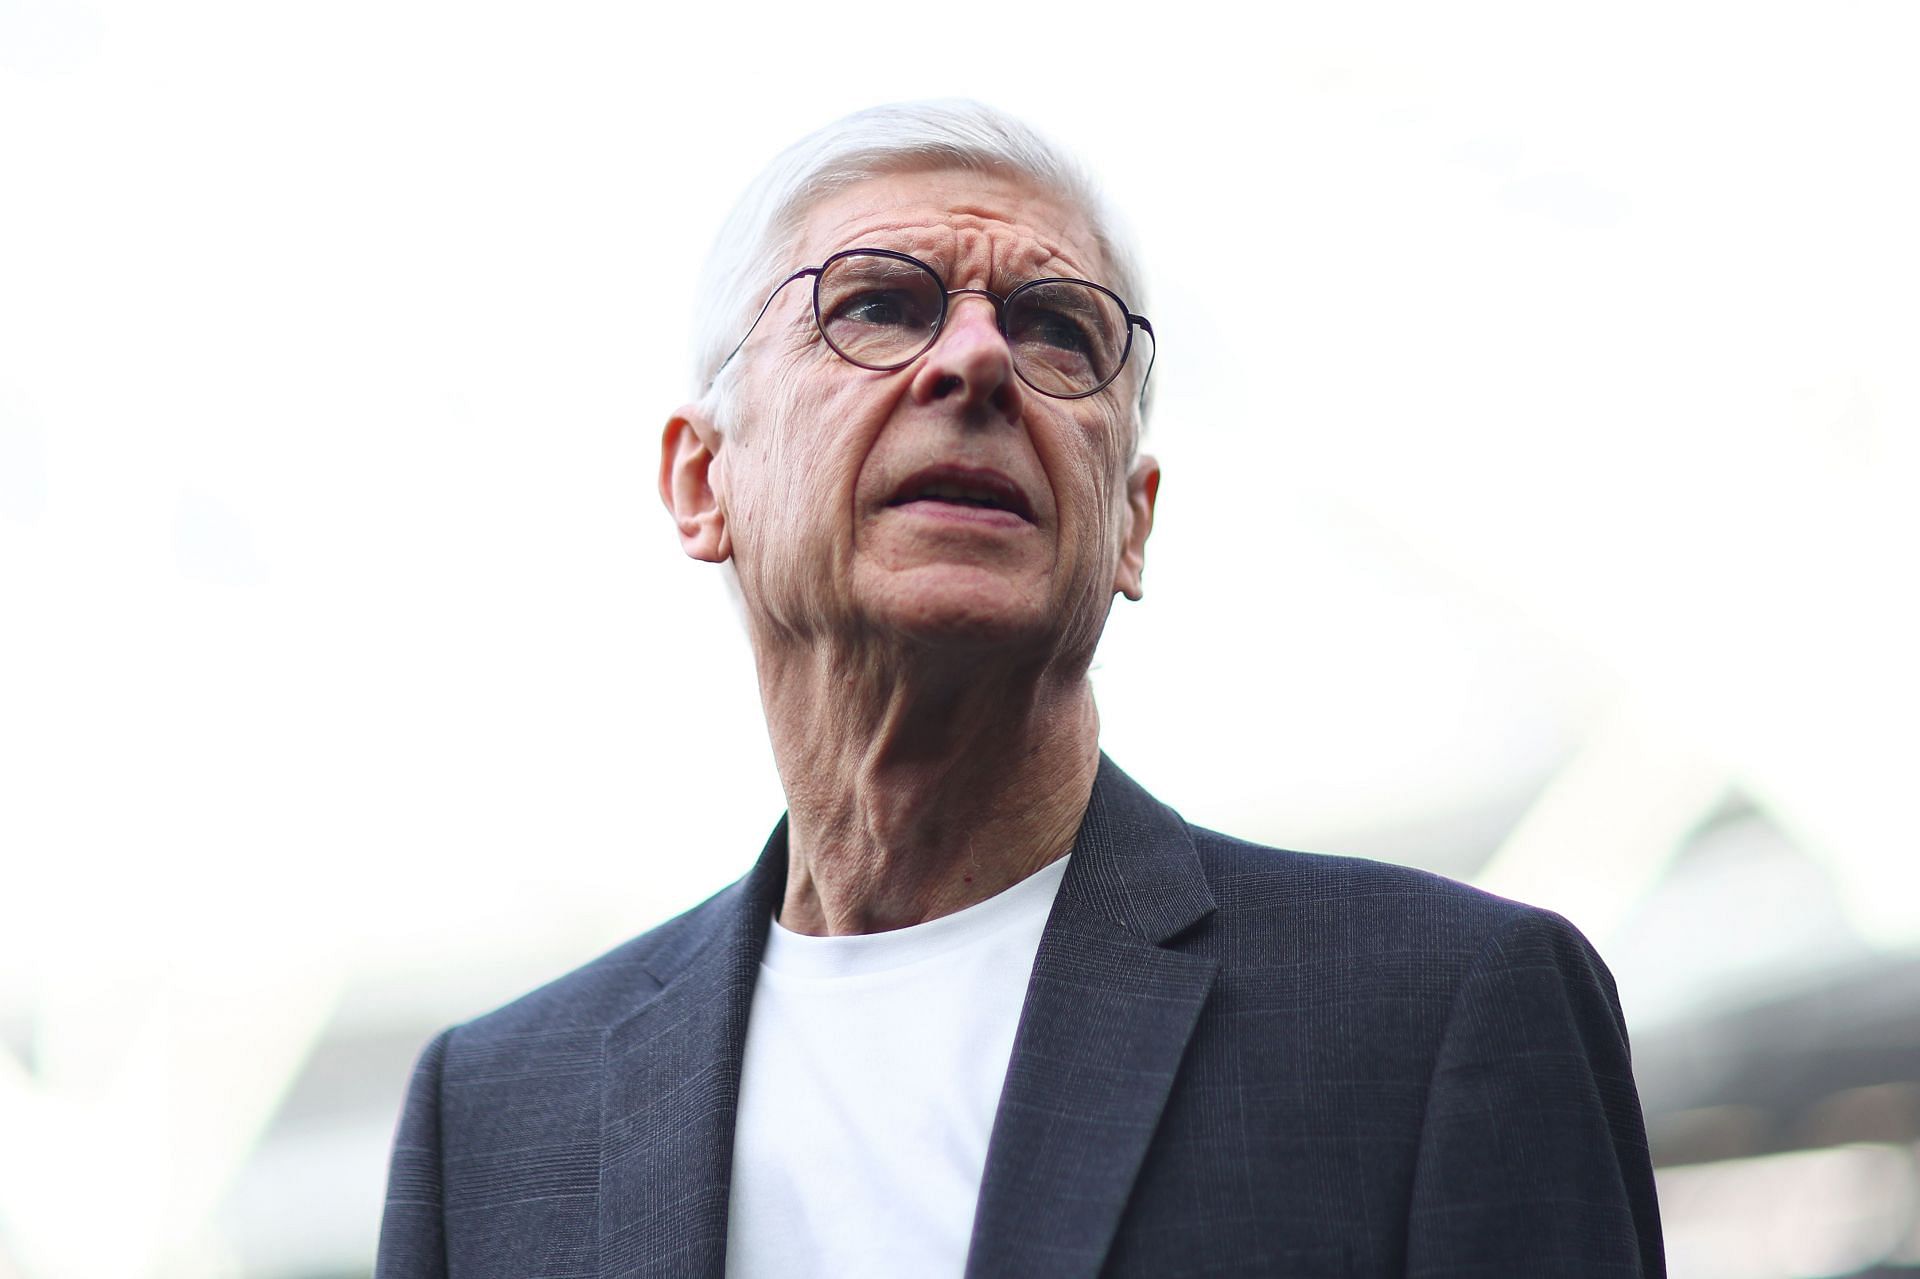 Former Arsenal manager Arsene Wenger spoke about the 2022 FIFA World Cup